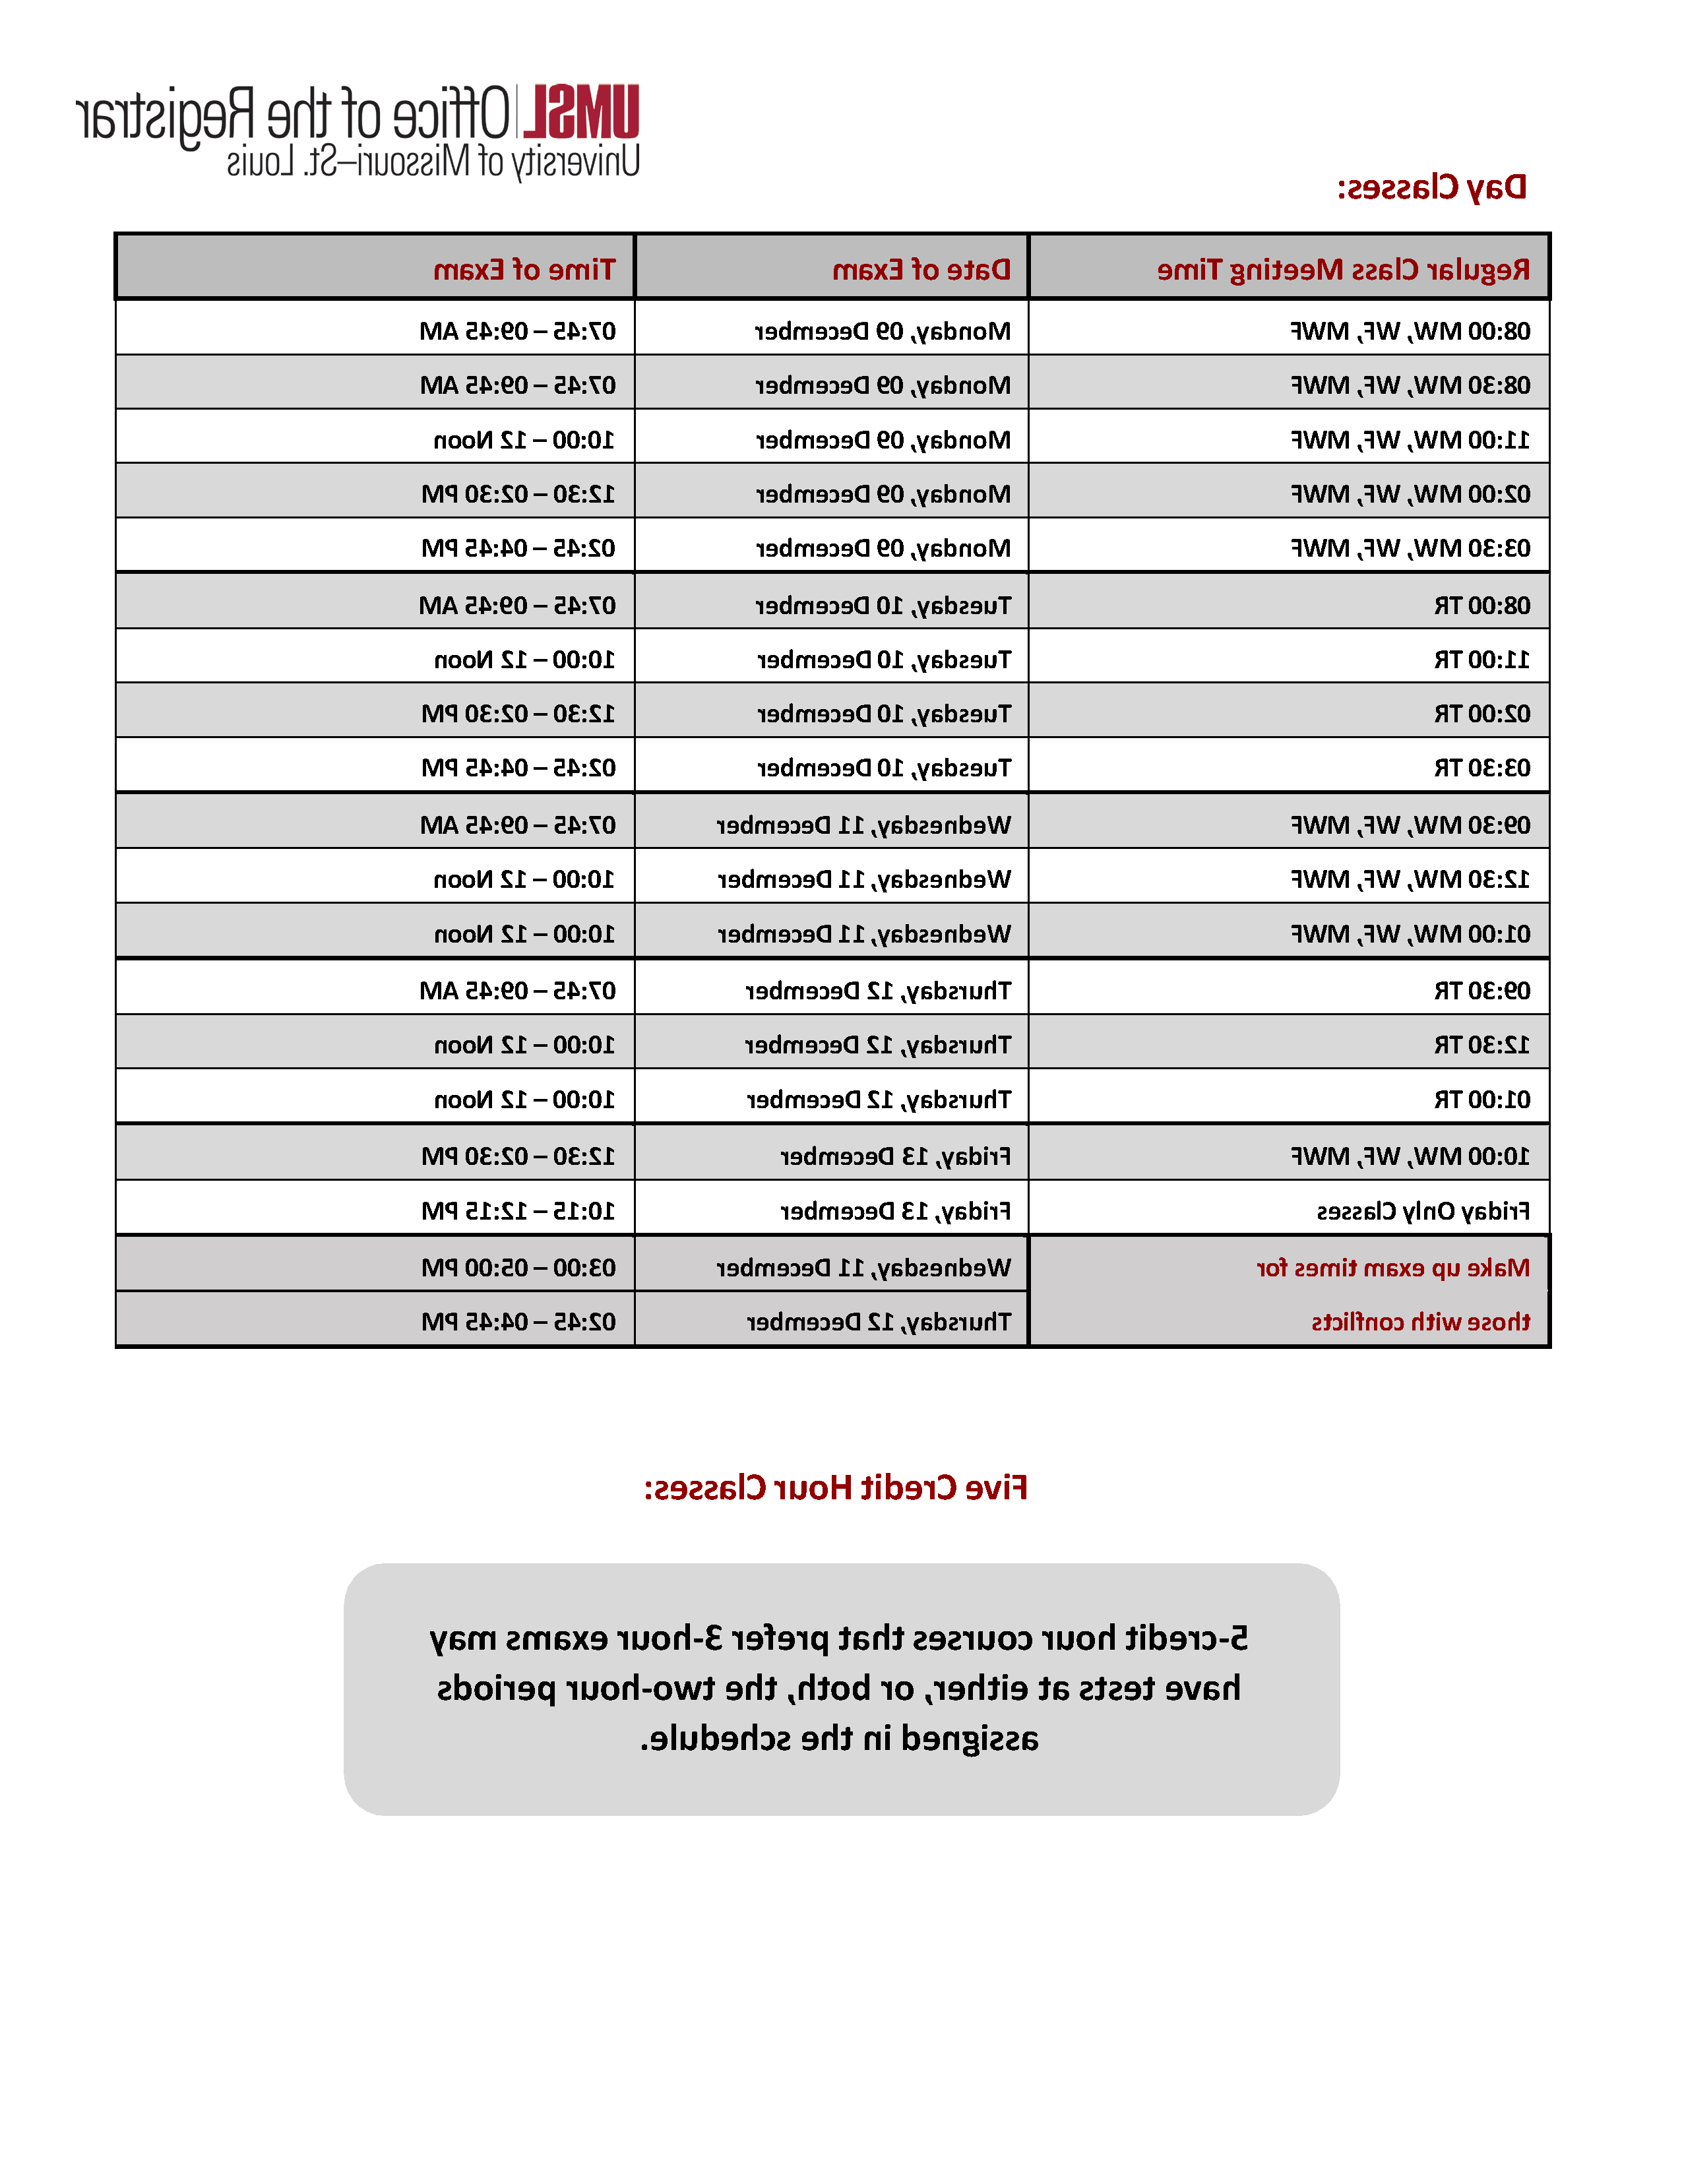 fall_24_final_exam_schedule_page_2.png